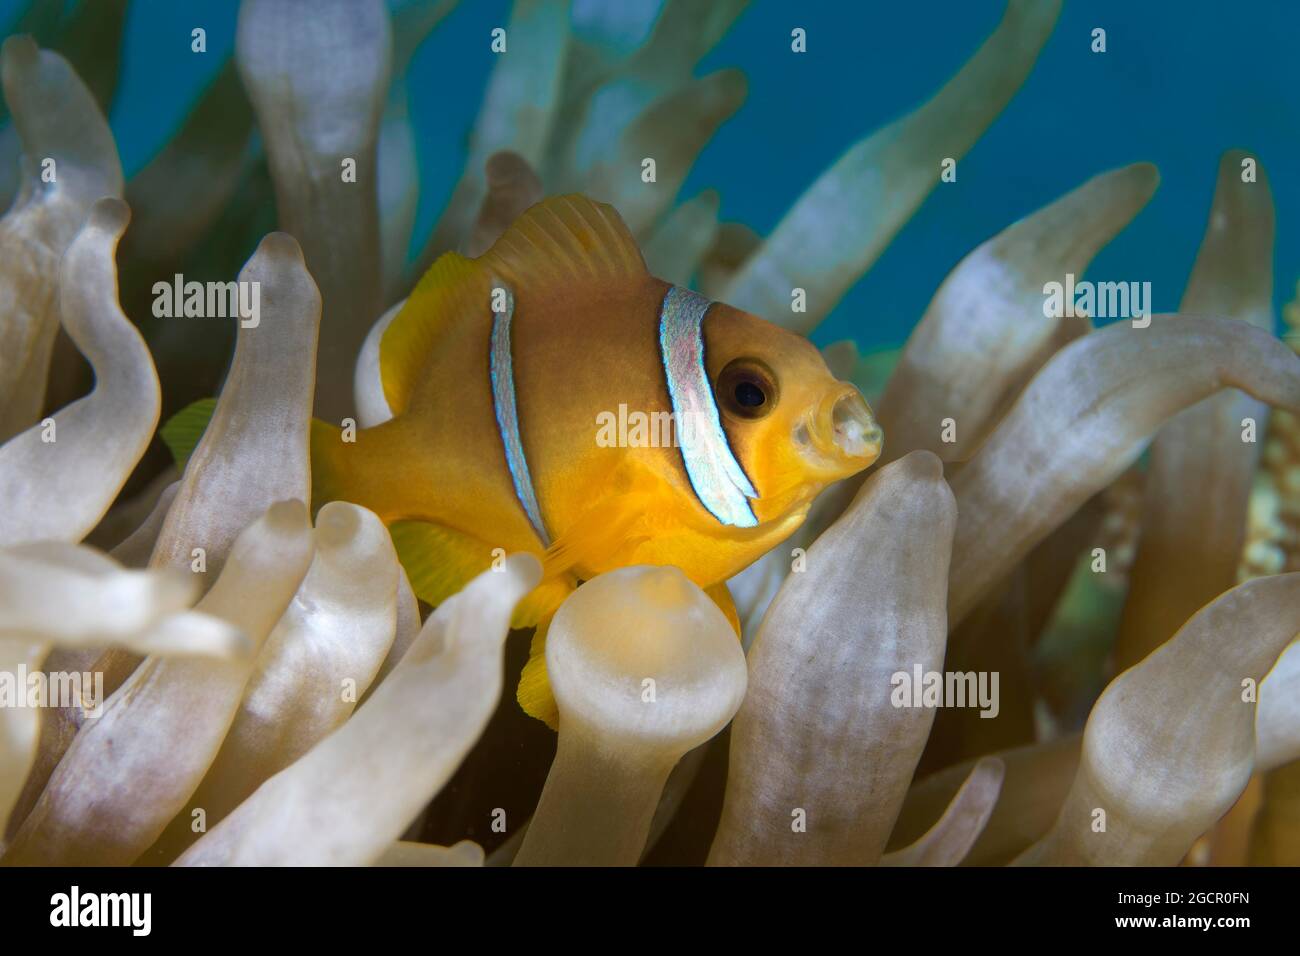 Juvenile Red Sea Red Sea clownfish (Amphiprion bicinctus) with open mouth, Red Sea, Aqaba, Kingdom of Jordan Stock Photo